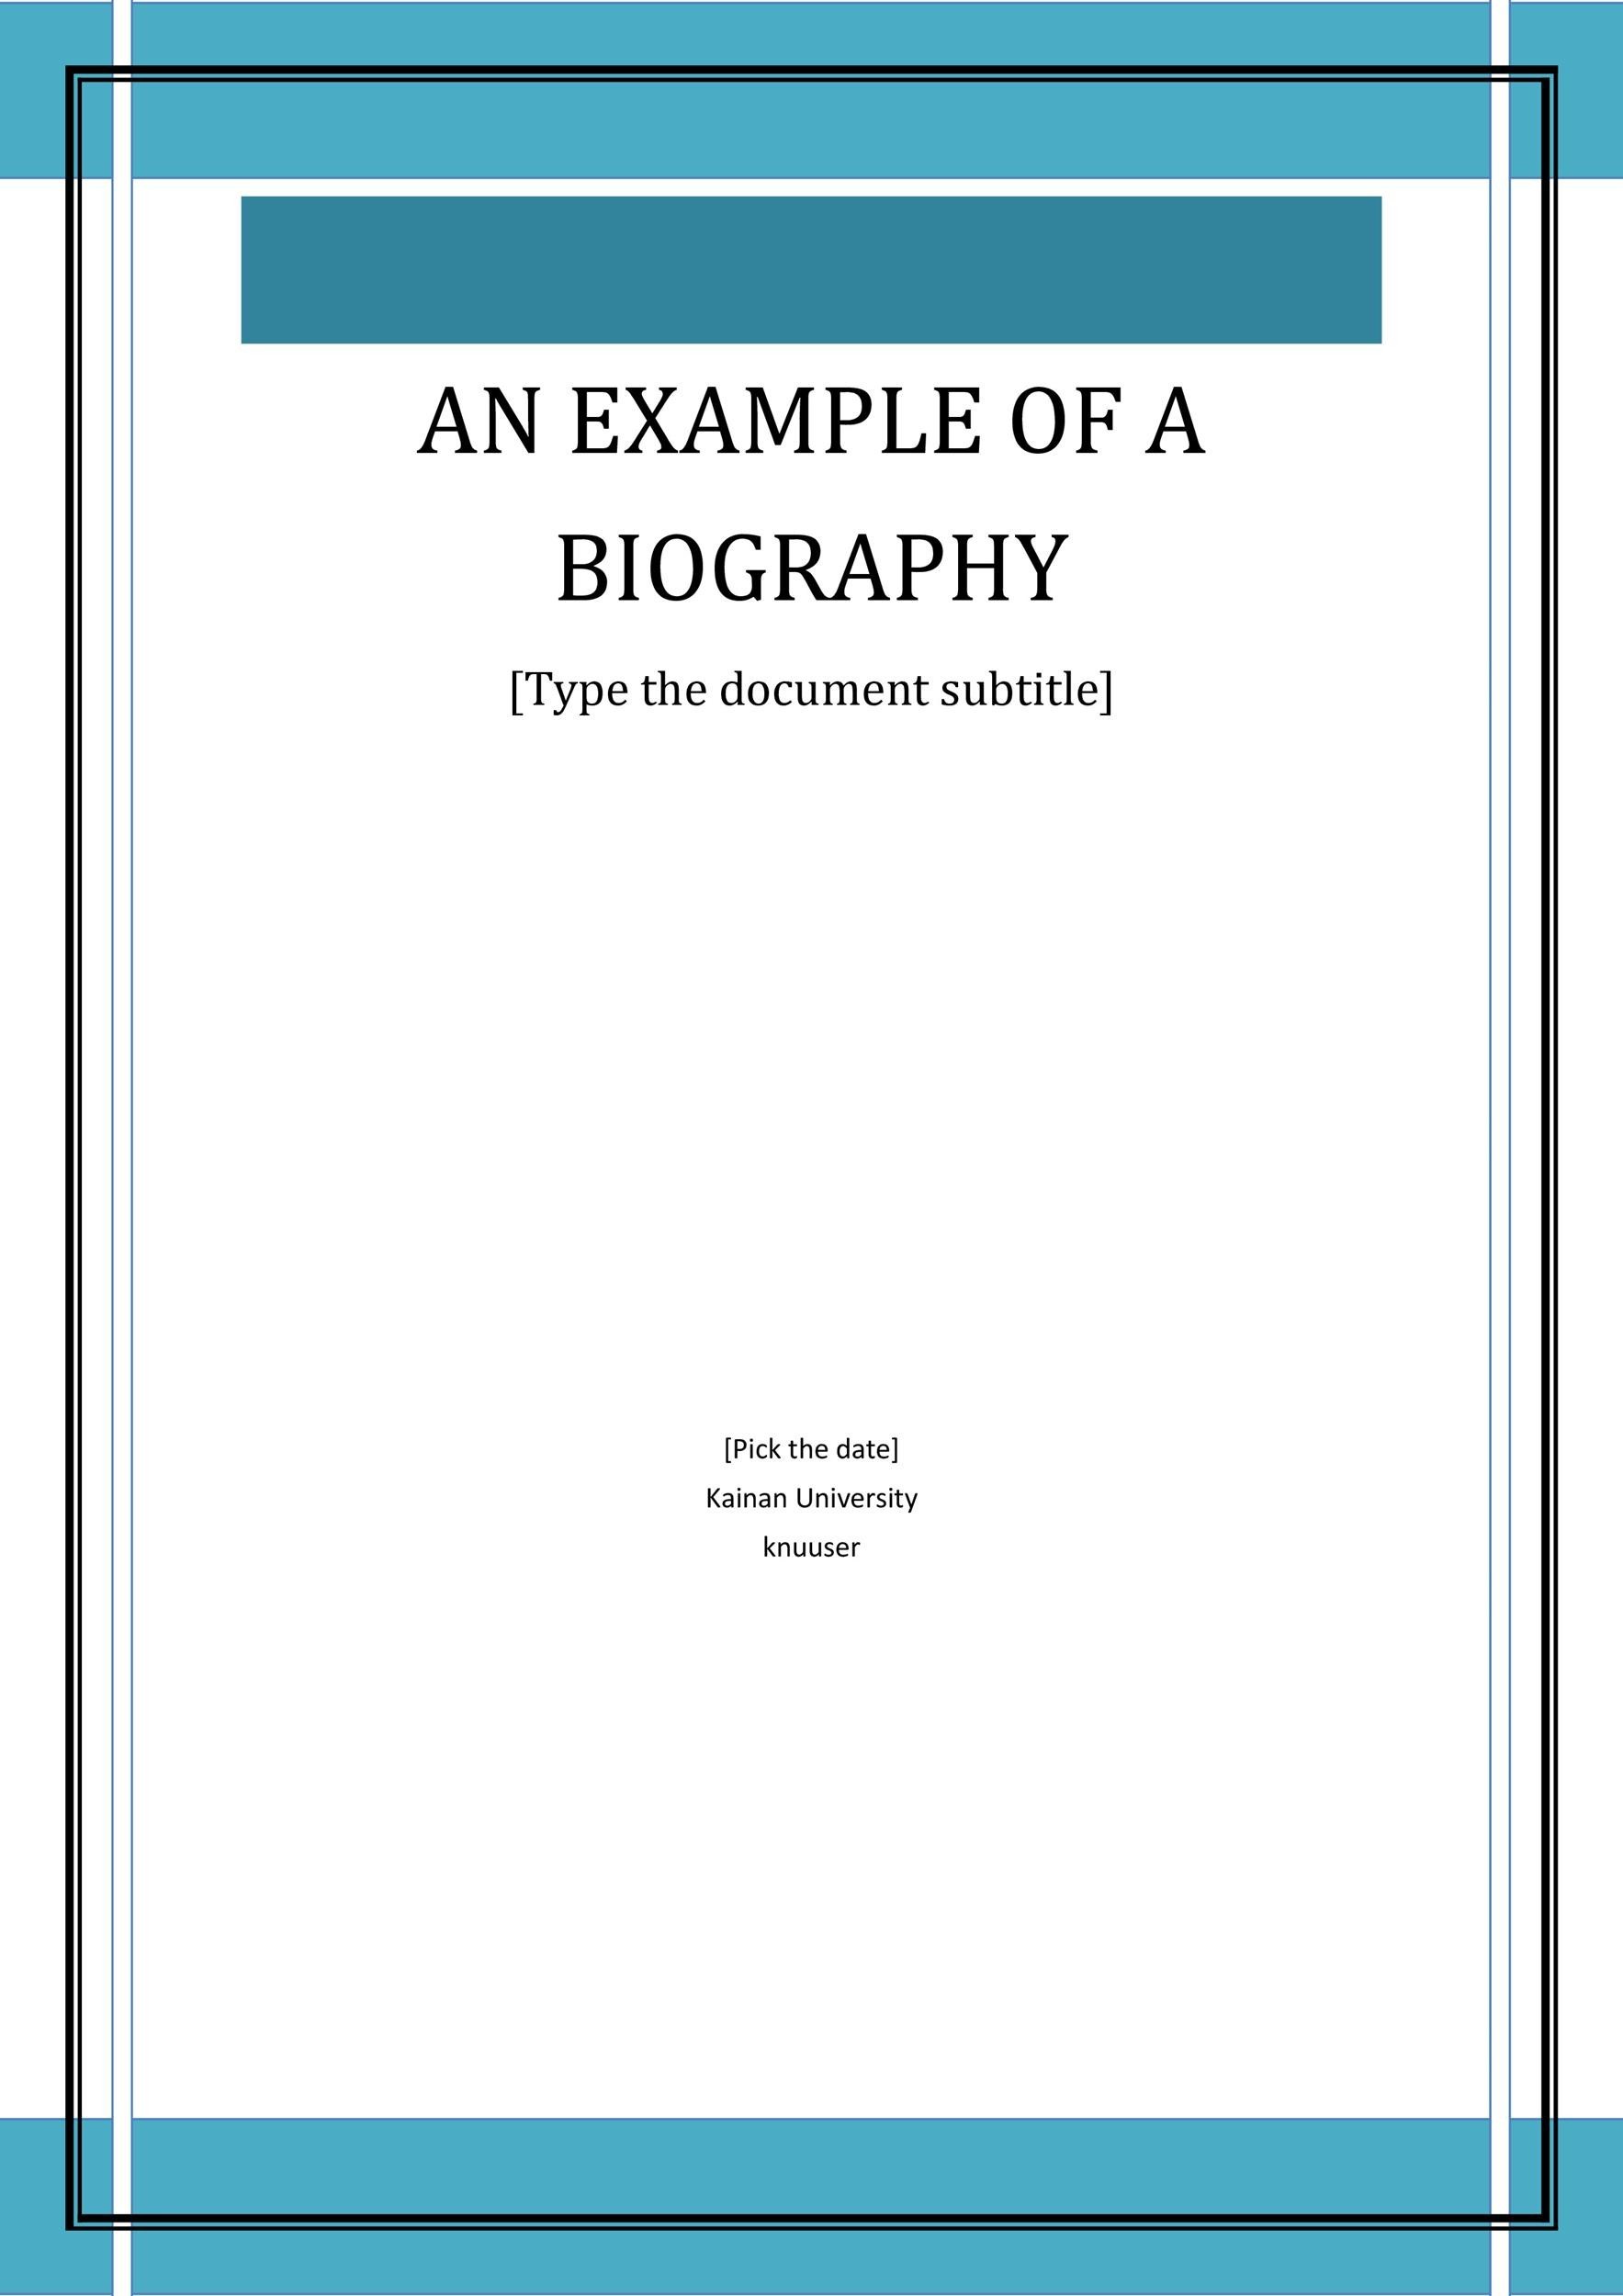 How to write a biographical sketch example